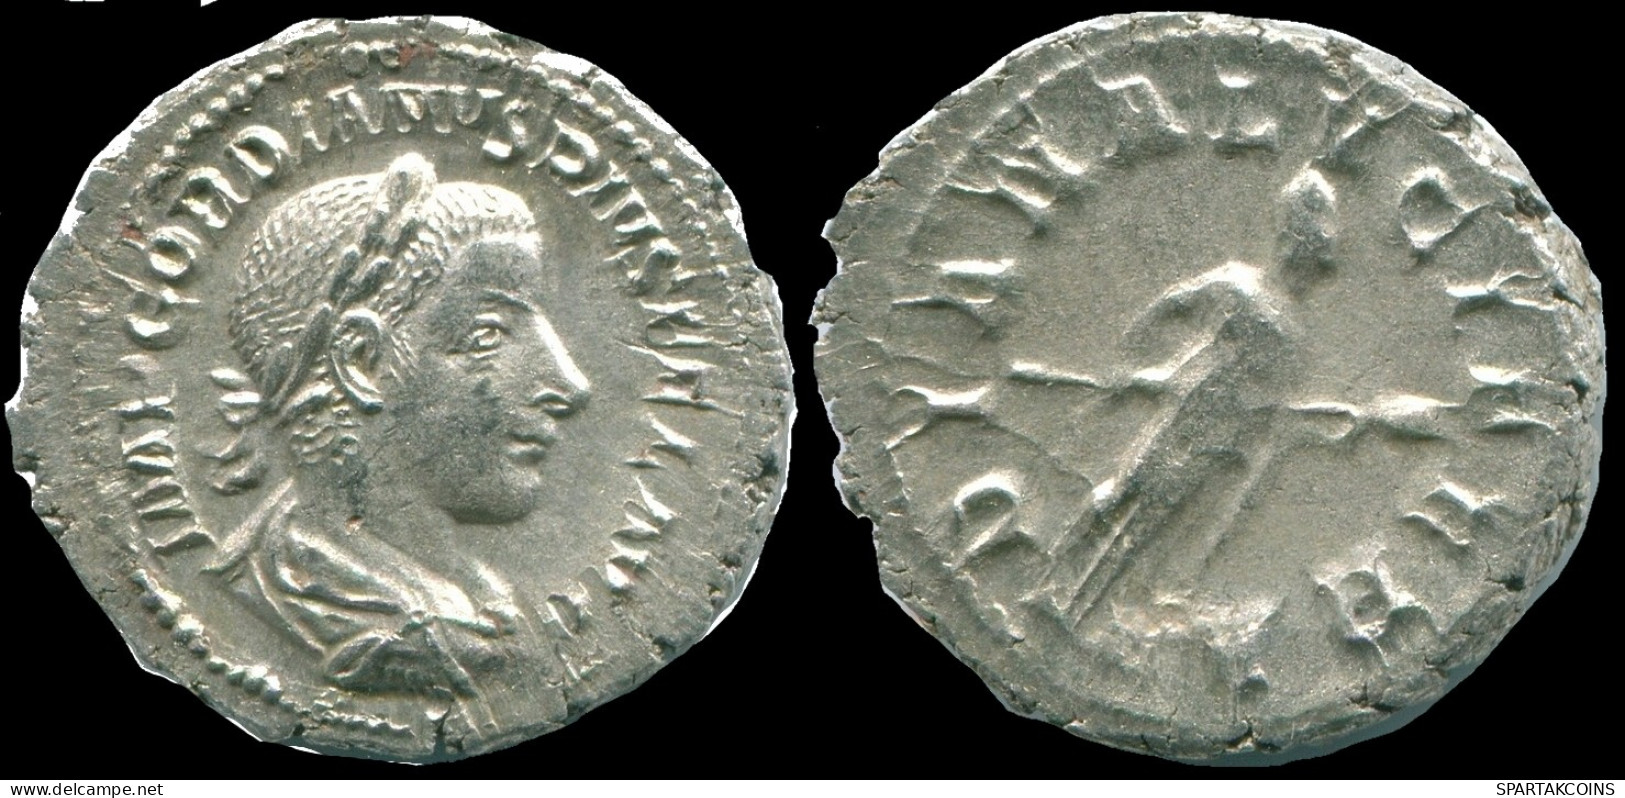 GORDIAN III AR DENARIUS ROME (7TH ISSUE. 1ST OFFICINA) DIANA #ANC13046.84.D.A - The Military Crisis (235 AD To 284 AD)